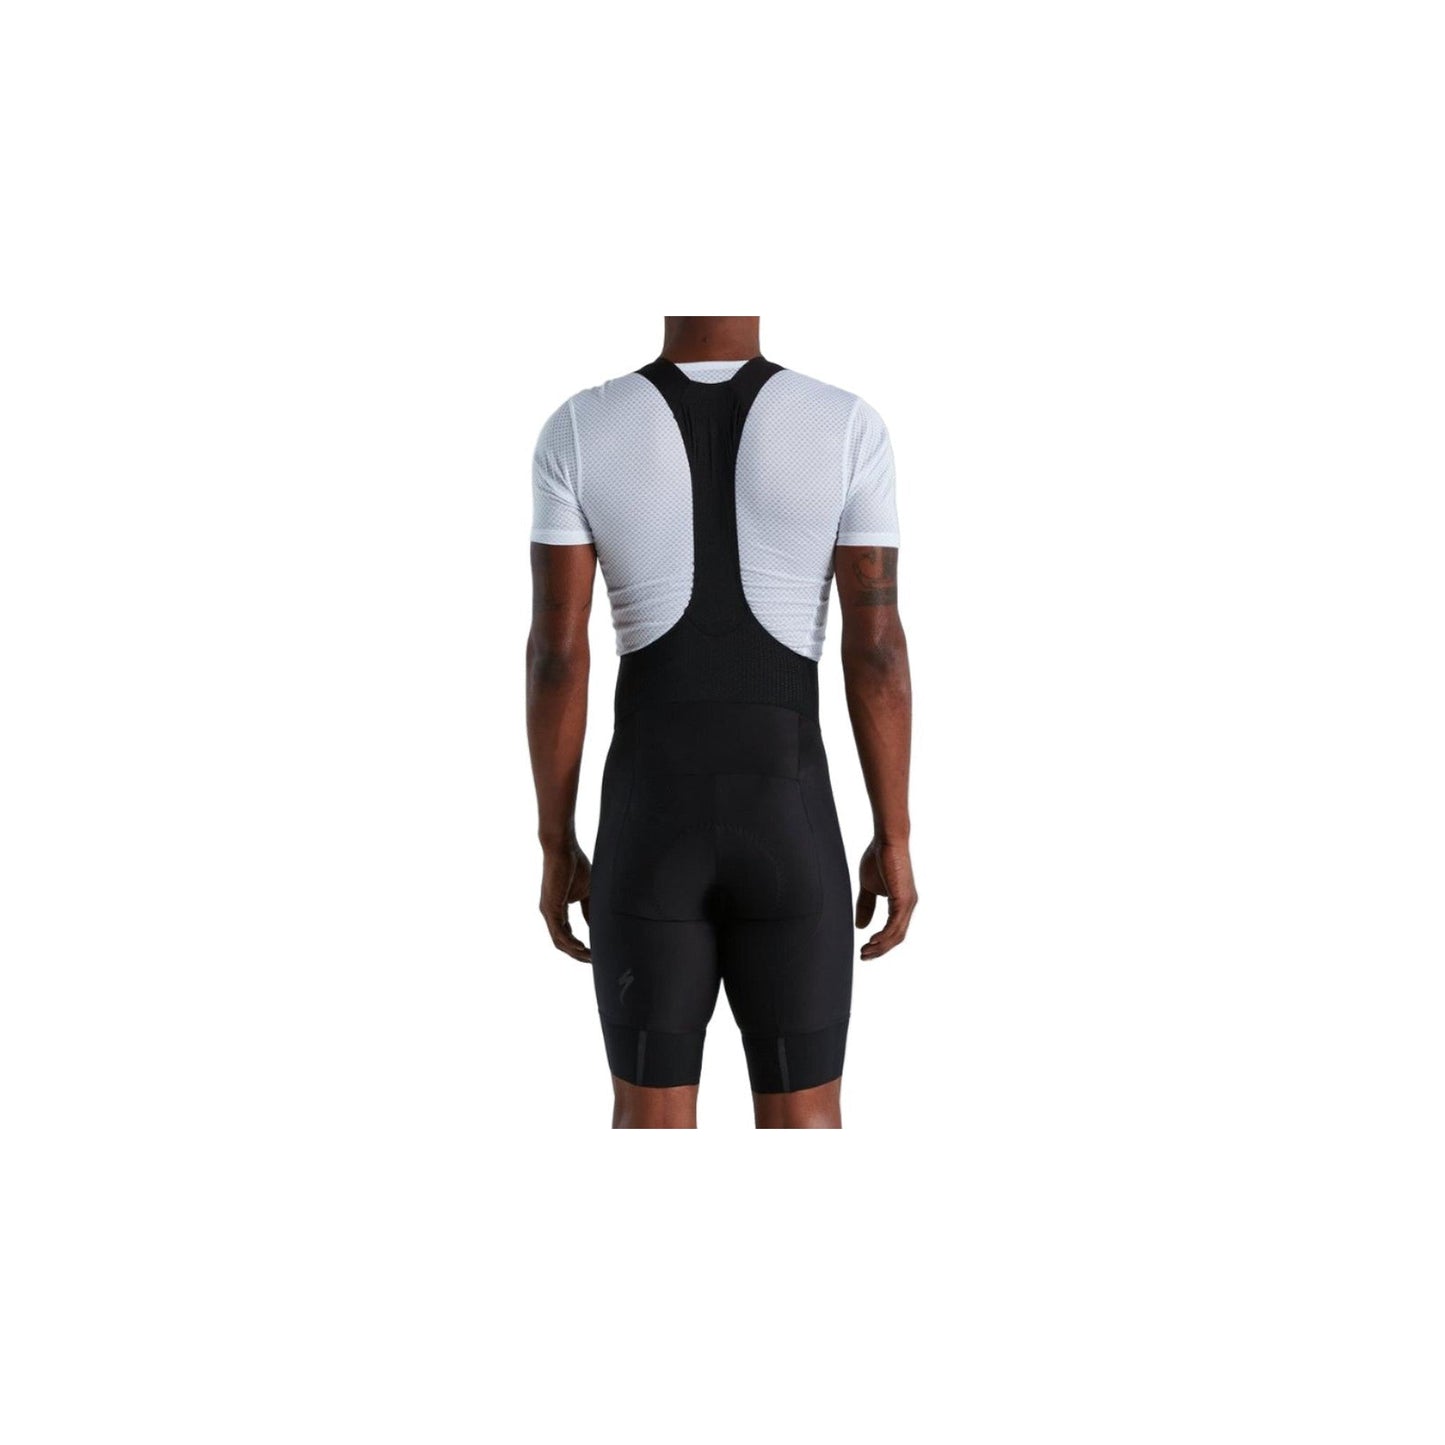 Men's SL Race Bib Shorts | Complete Cyclist - There's quite a few boxes that your 'favorite pair of bib shorts" must check. The chamois has to be perfect—soft to touch, foam in all the right places, and perfect shape. And the materials must be compressive, yet still comfortable while being sized correctly. It's been a lengthy process, but we're happy to say that the SL Race Bib Shorts check all the right boxes.